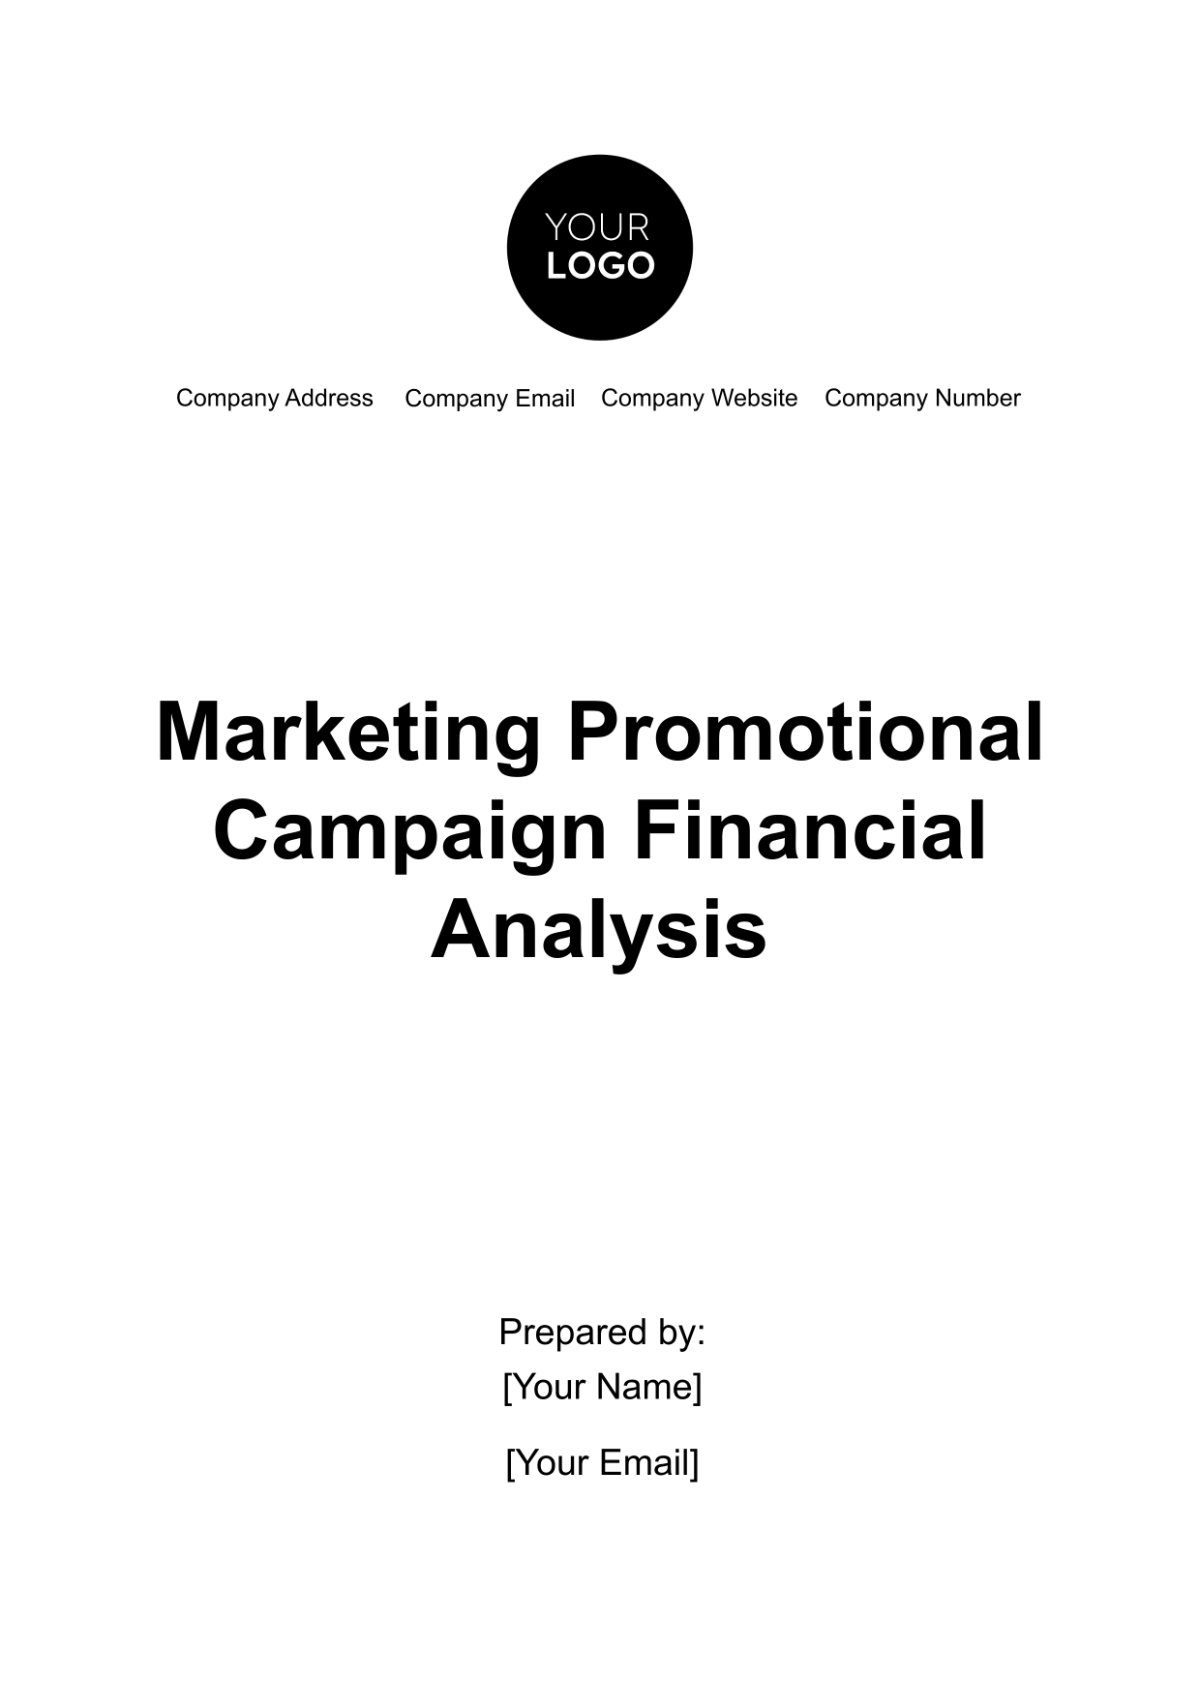 Free Marketing Promotional Campaign Financial Analysis Template